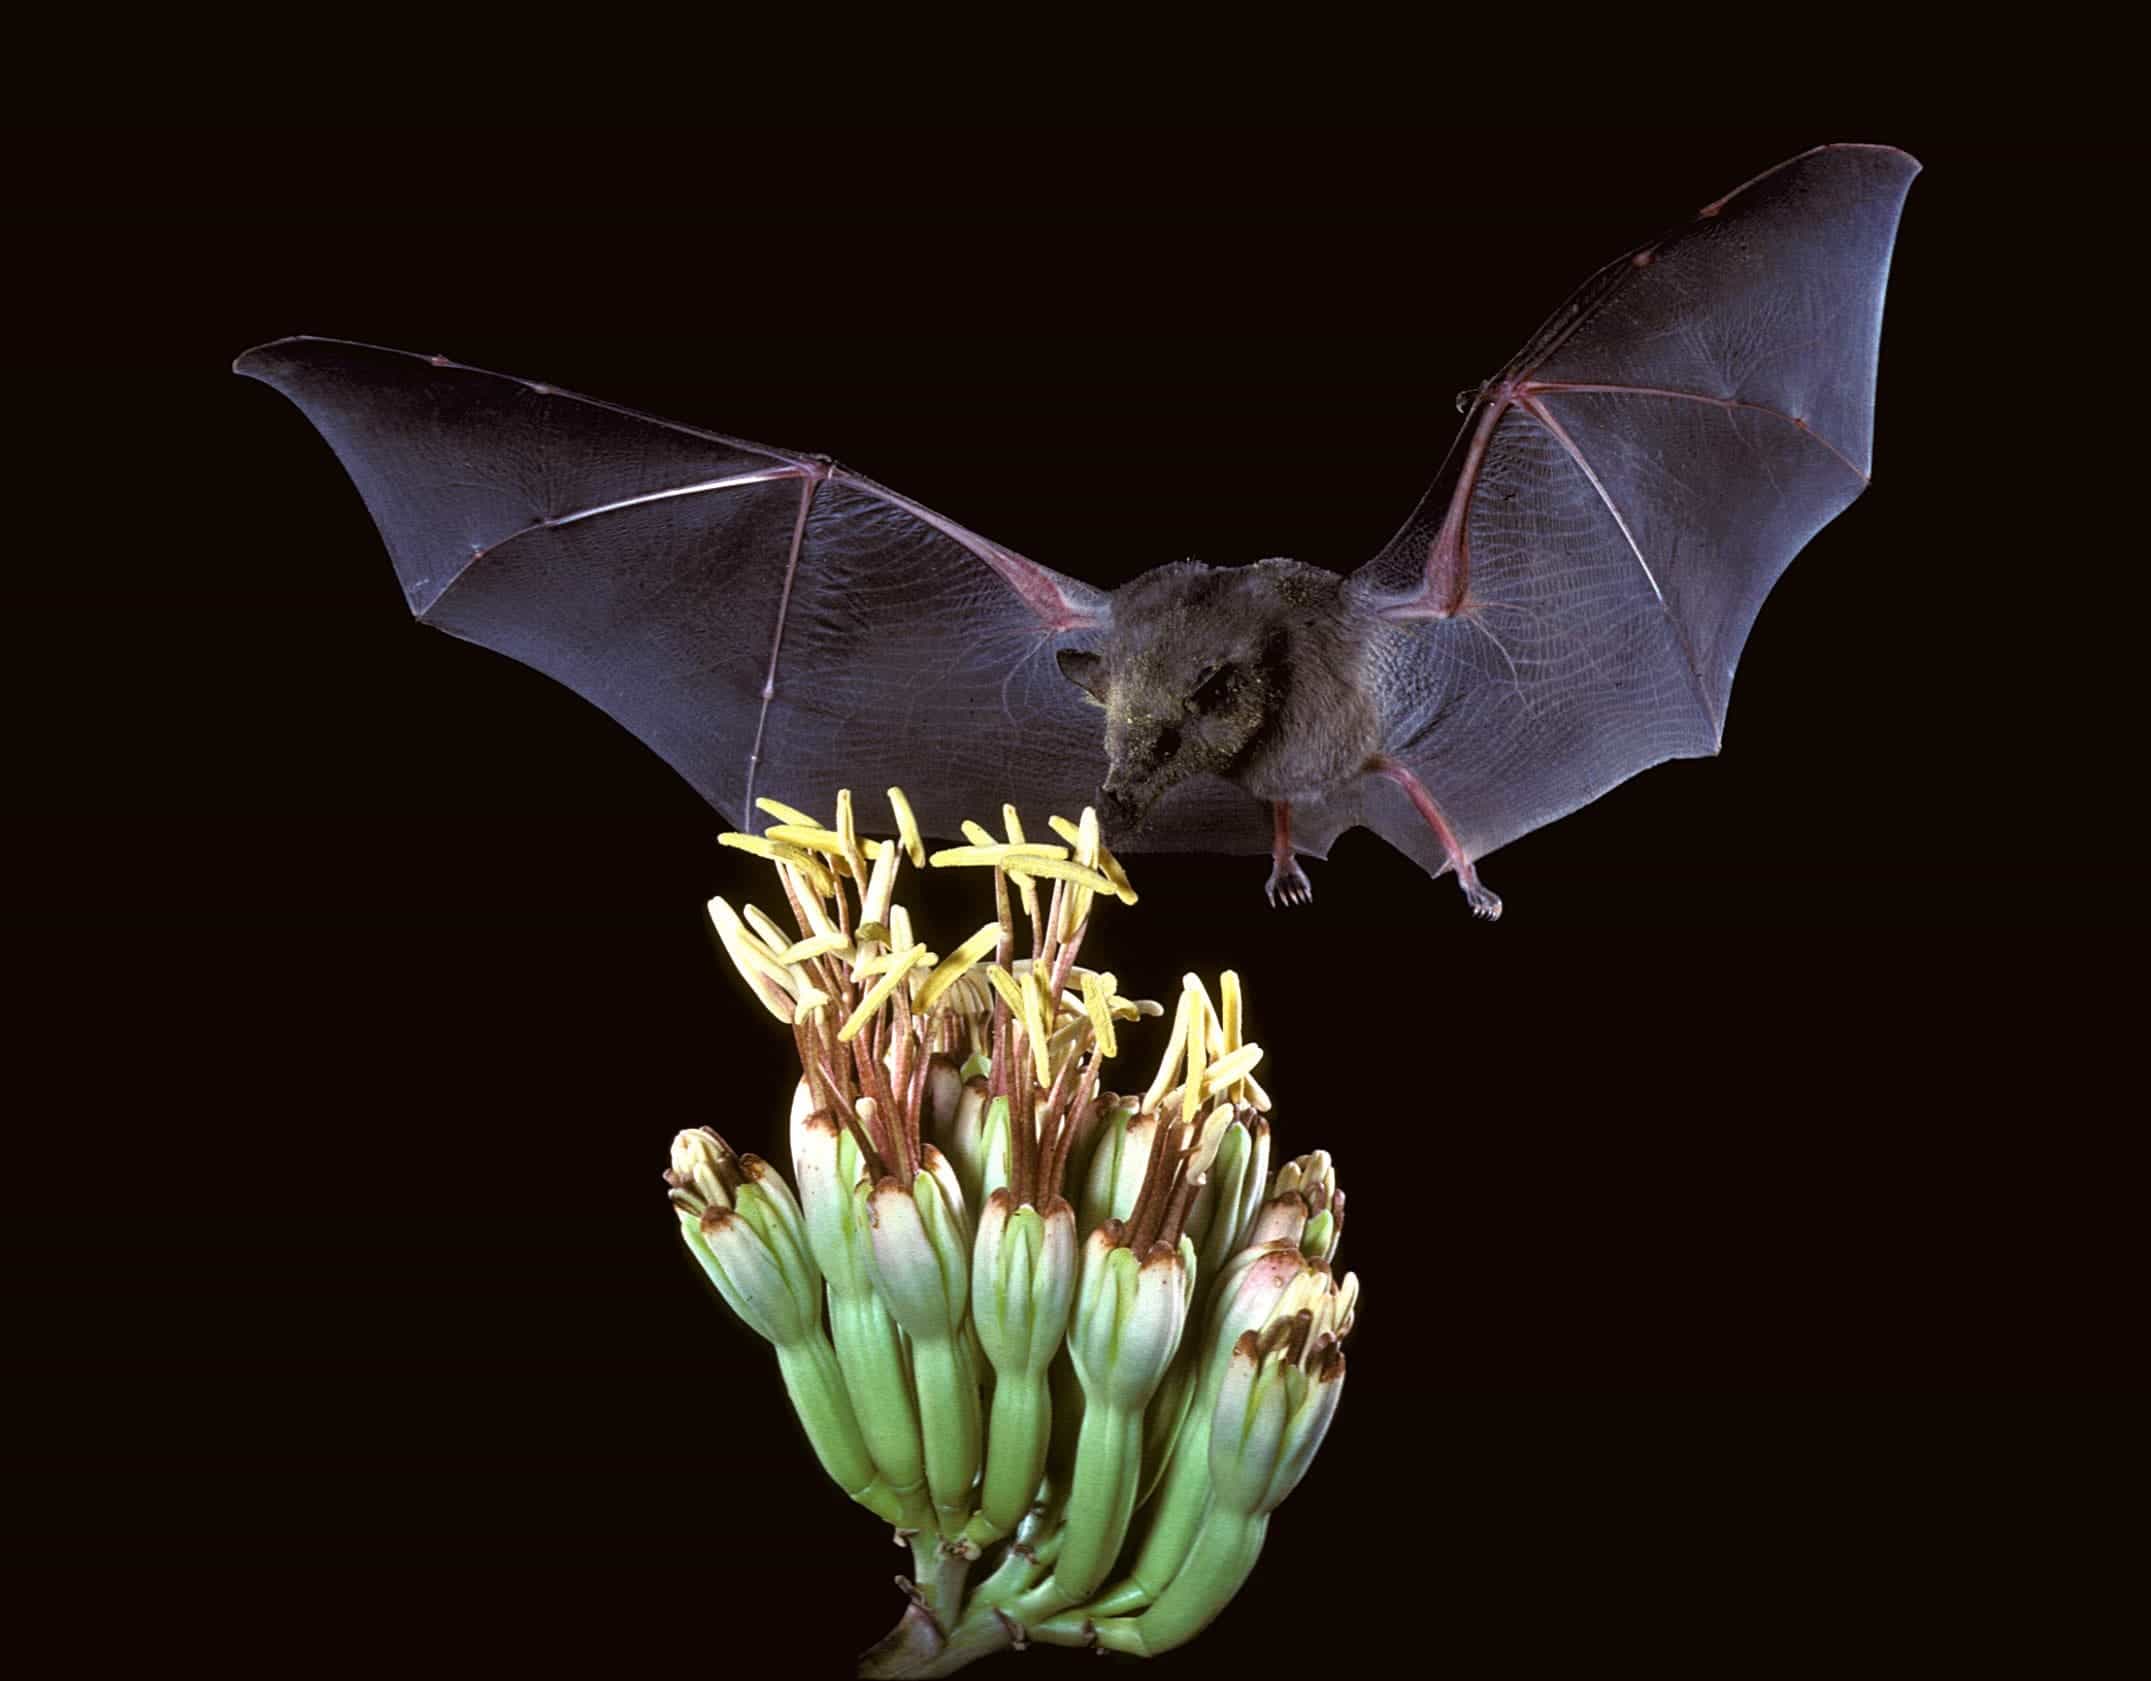 A bat drinking nectar from a cactus flower. Image credits: U.S. Fish and Wildlife Service Headquarters.